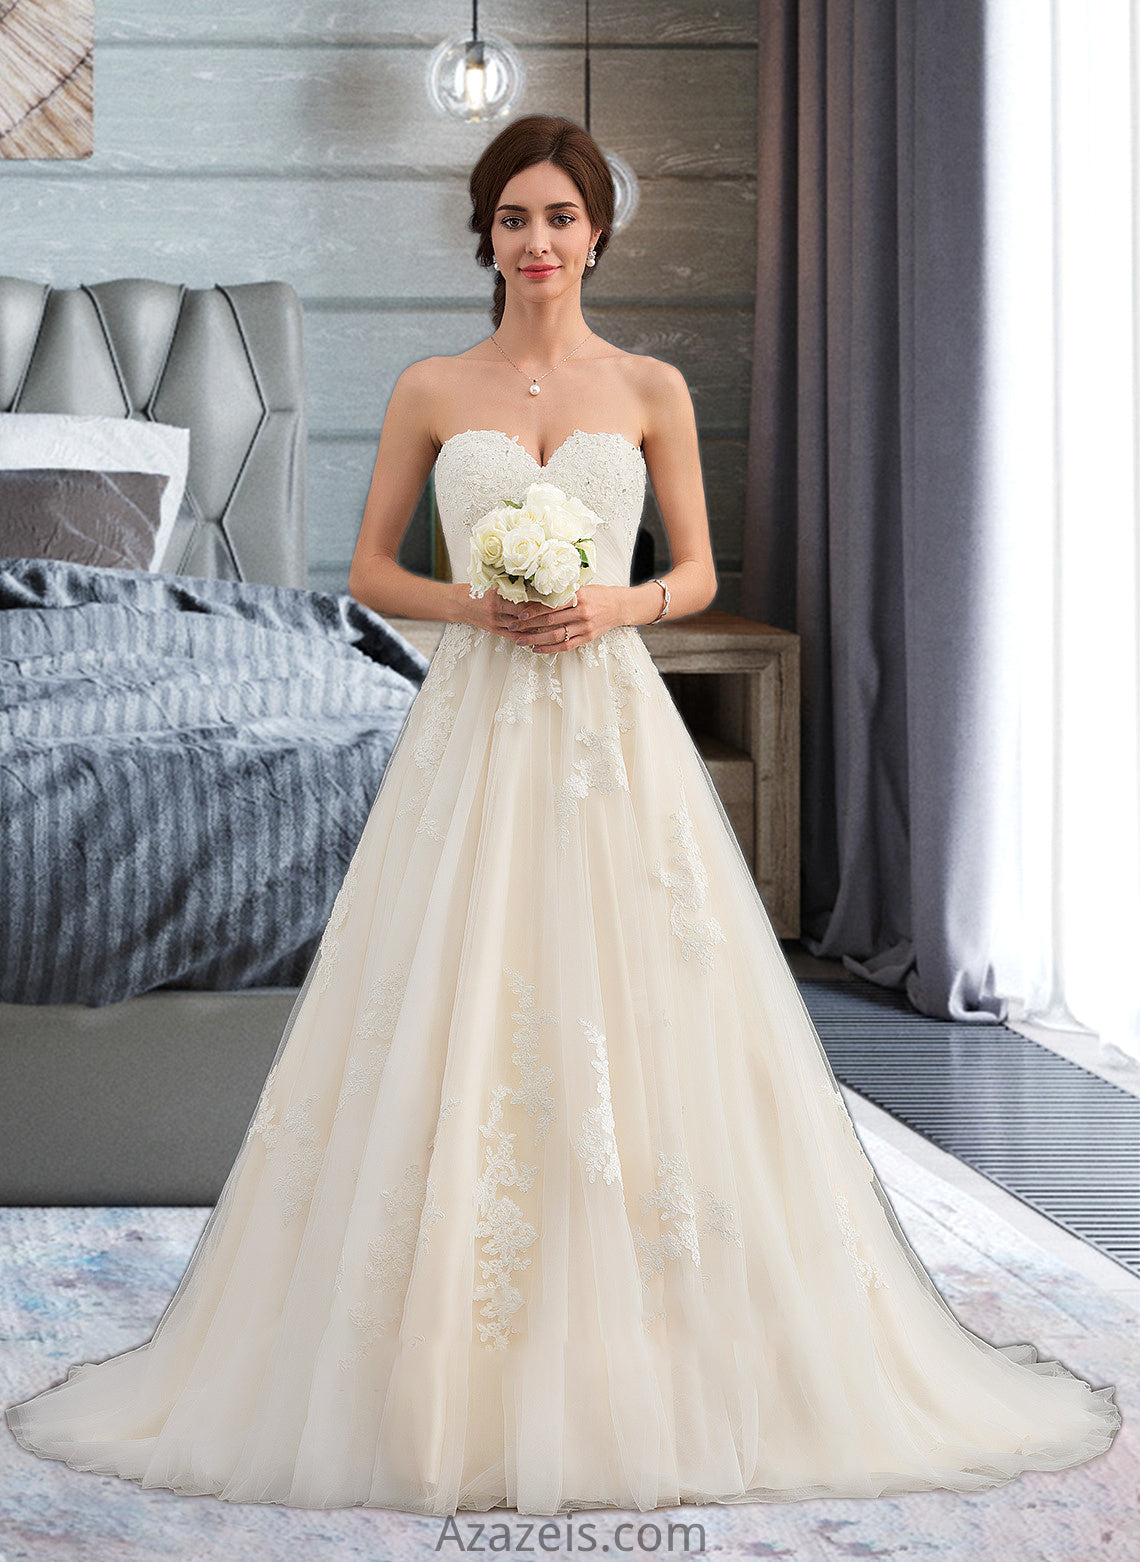 Micah Ball-Gown/Princess Sweetheart Court Train Tulle Wedding Dress With Ruffle Beading DFP0013766